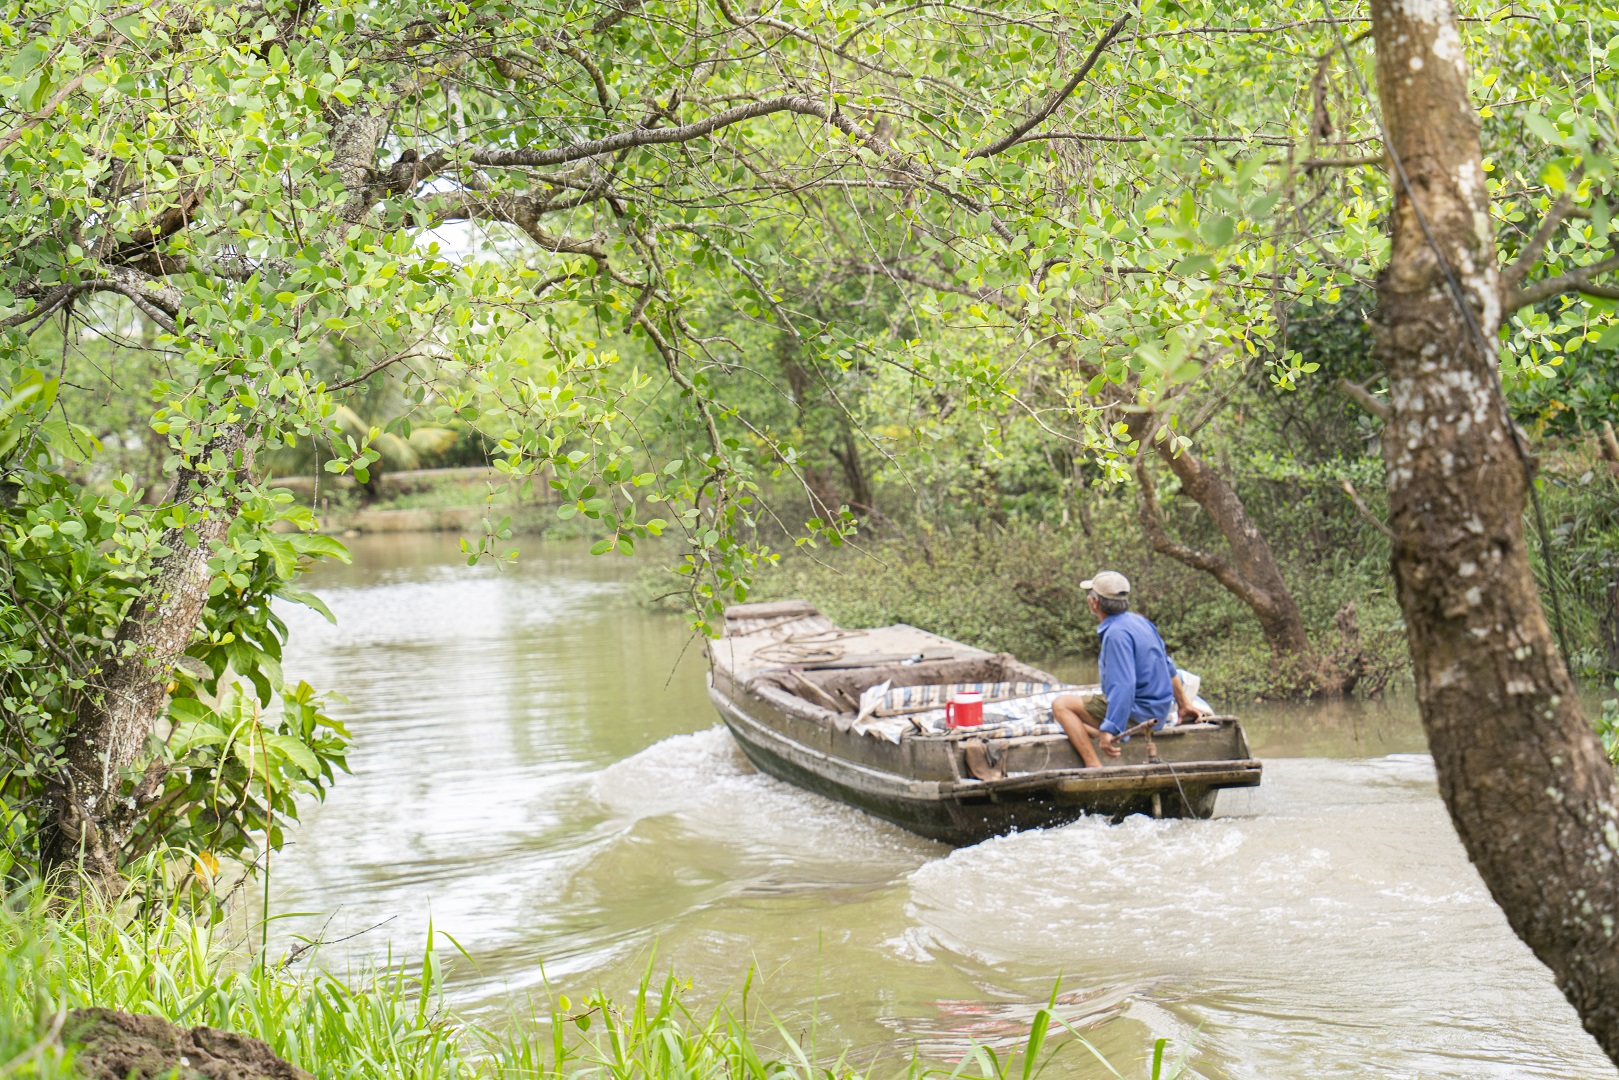 Traveling on waterways to pass through forests is a must-try experience when visit Vietnam’s Mekong Delta. Photo: Nguyen Trung Au / Tuoi Tre News